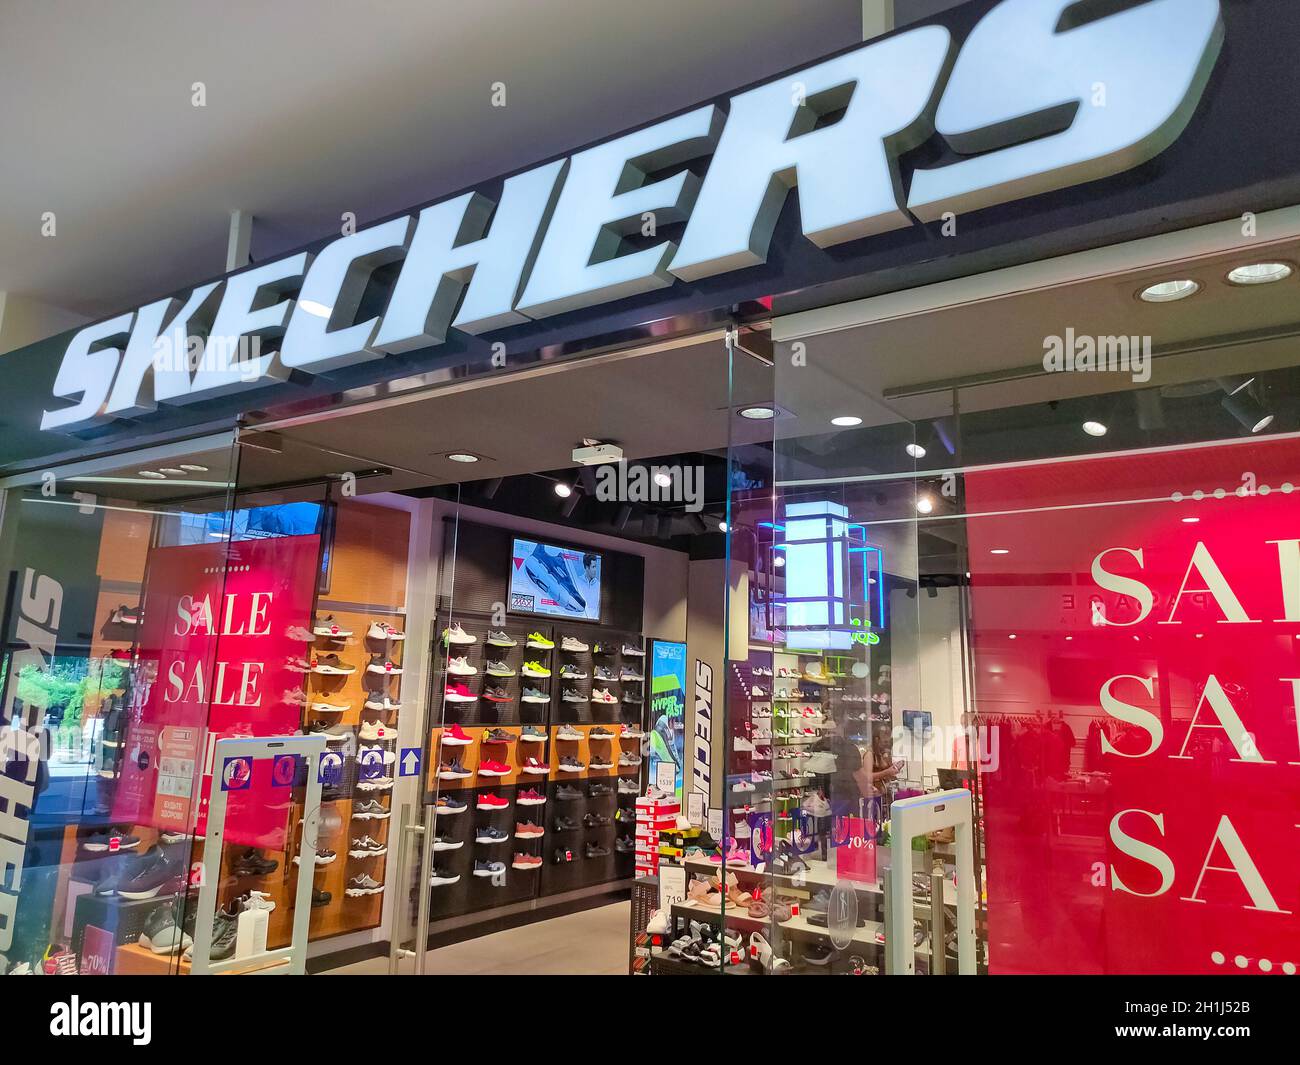 Kiyv, Ukraine - August 30, 2020: Sign of Skechers on the shop at Shopping  Mall. Skechers is an American shoes company founded by CEO Robert Greenberg  Stock Photo - Alamy